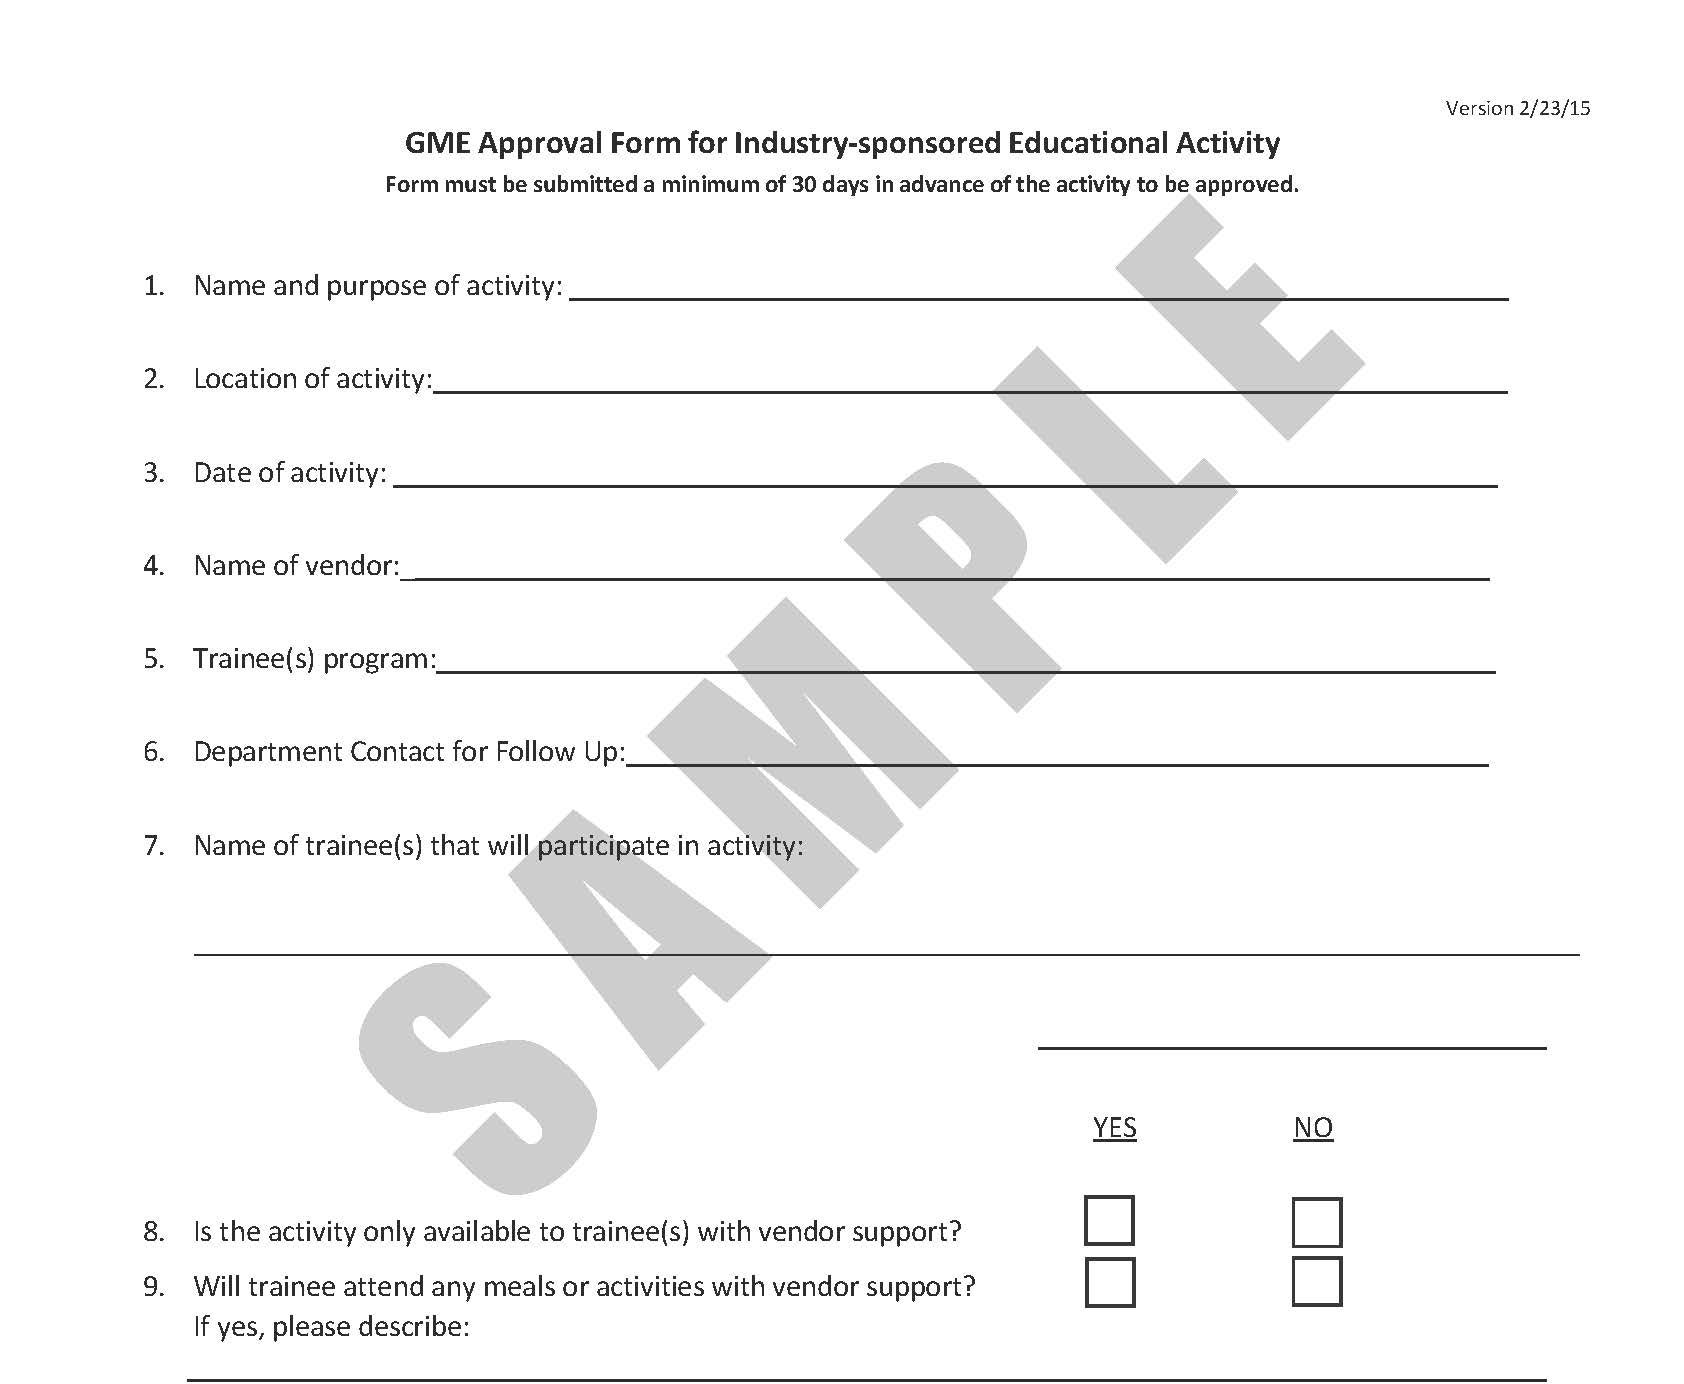 GME Approval Form for Industry-sponsored Educational Activity